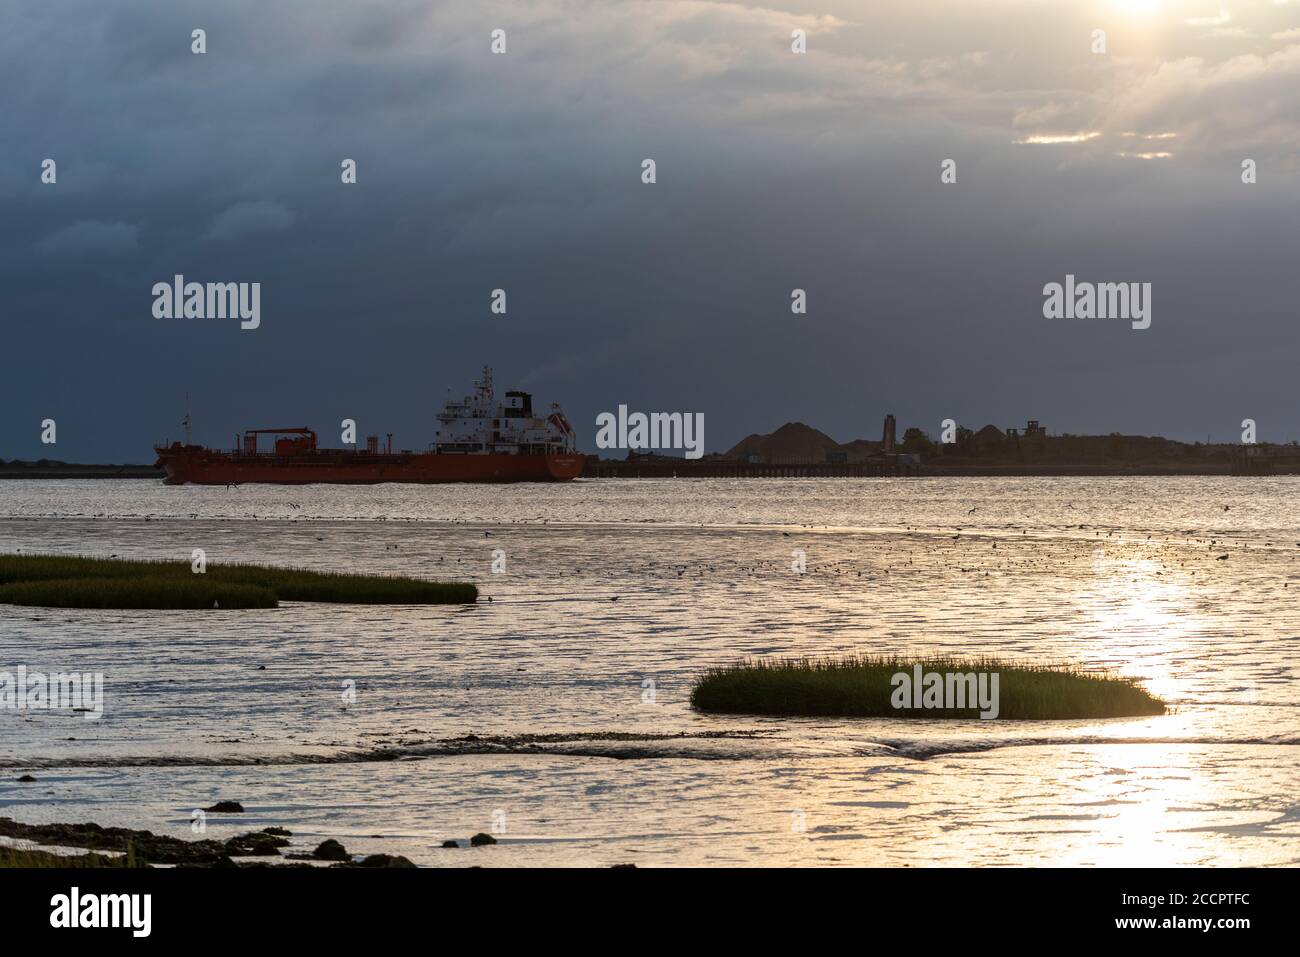 Cargo ship on the River Thames at Coalhouse Fort, East Tilbury, Thurrock, Essex, UK, at dawn heading into bad weather. Dark skies, threatening Stock Photo